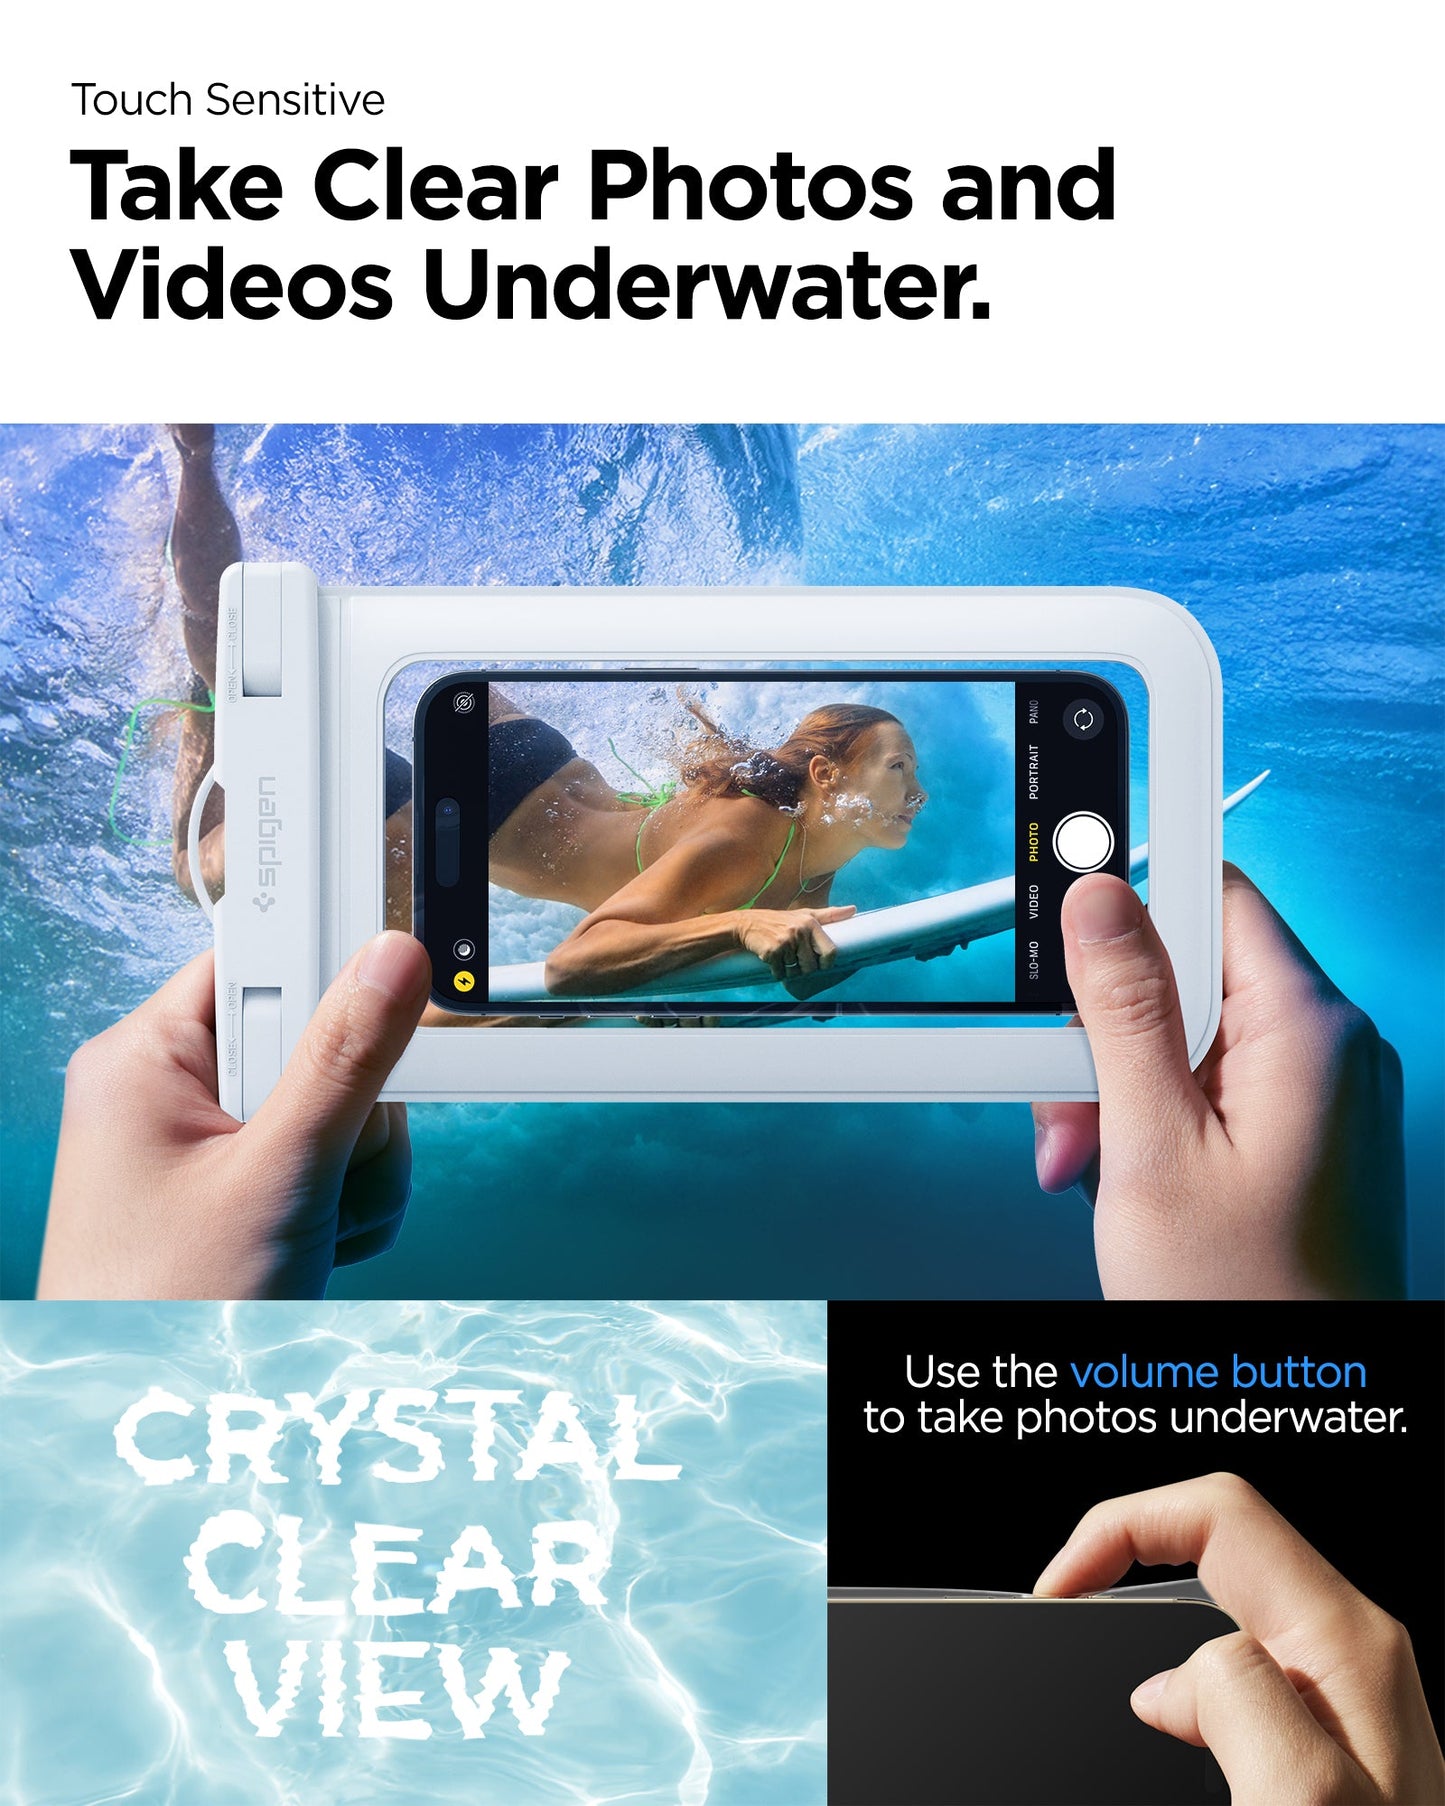 ACS06006 - AquaShield Waterproof Case A601 in White showing the touch sensitivity, can take clear photos and videos underwater, use volume button to take photos underwater